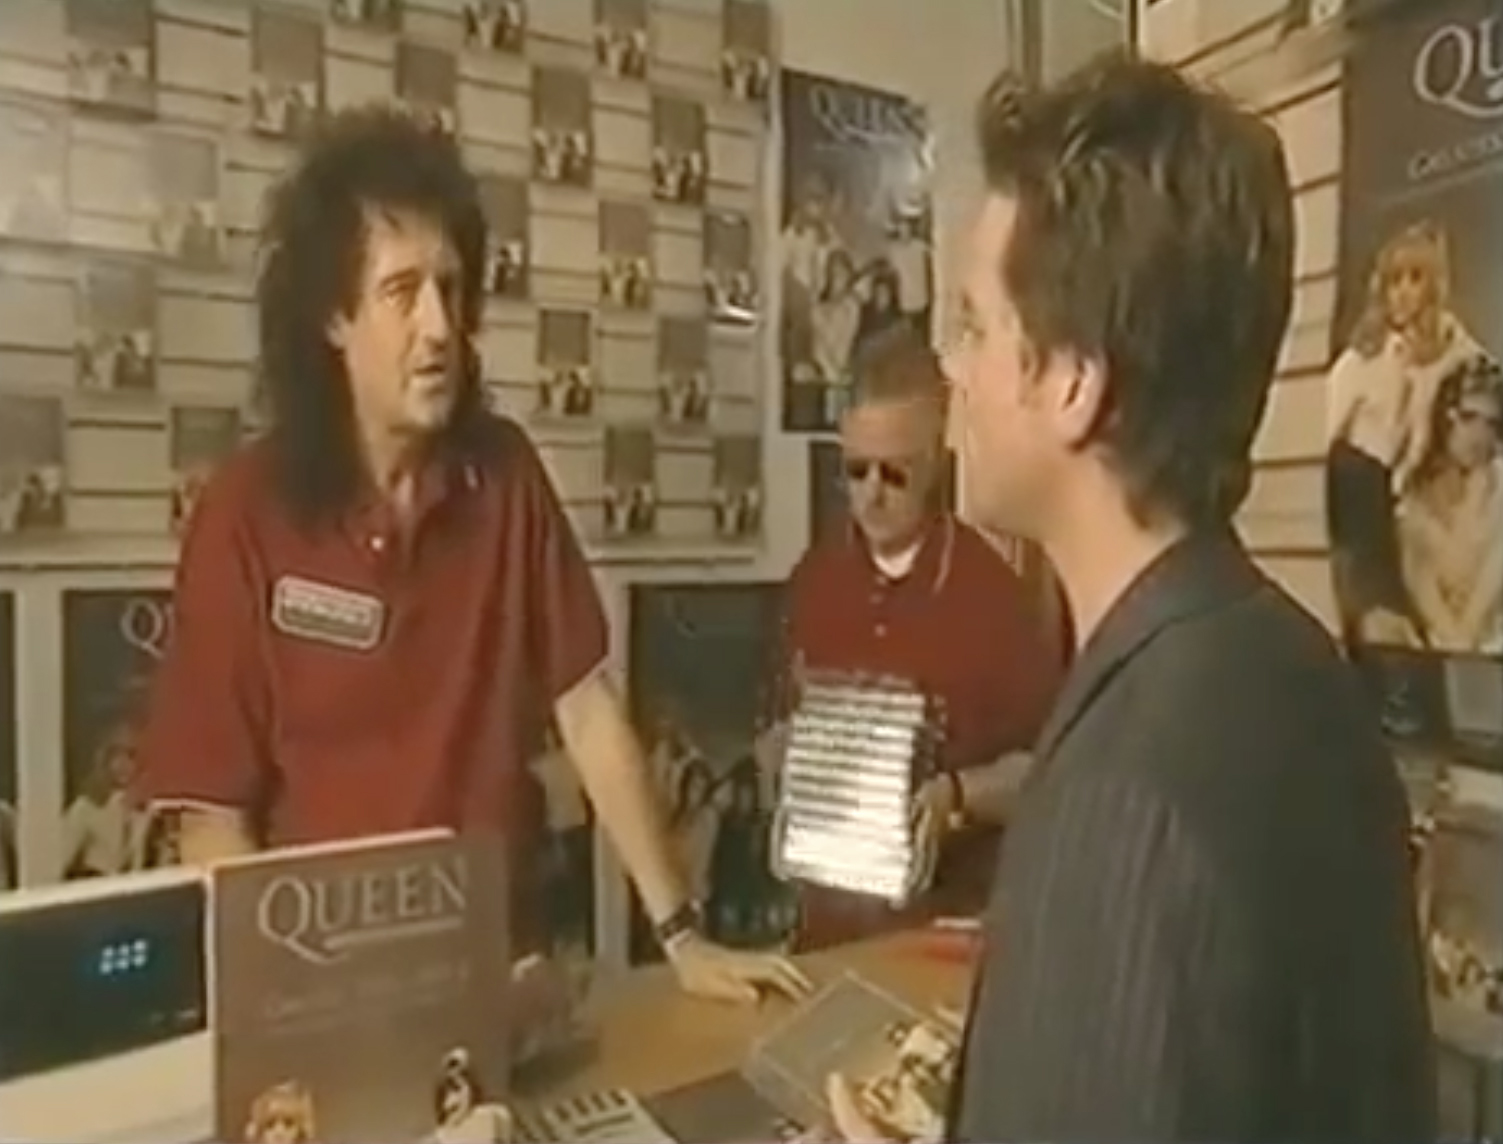 Queen Greatest Video Hits II Record Shop